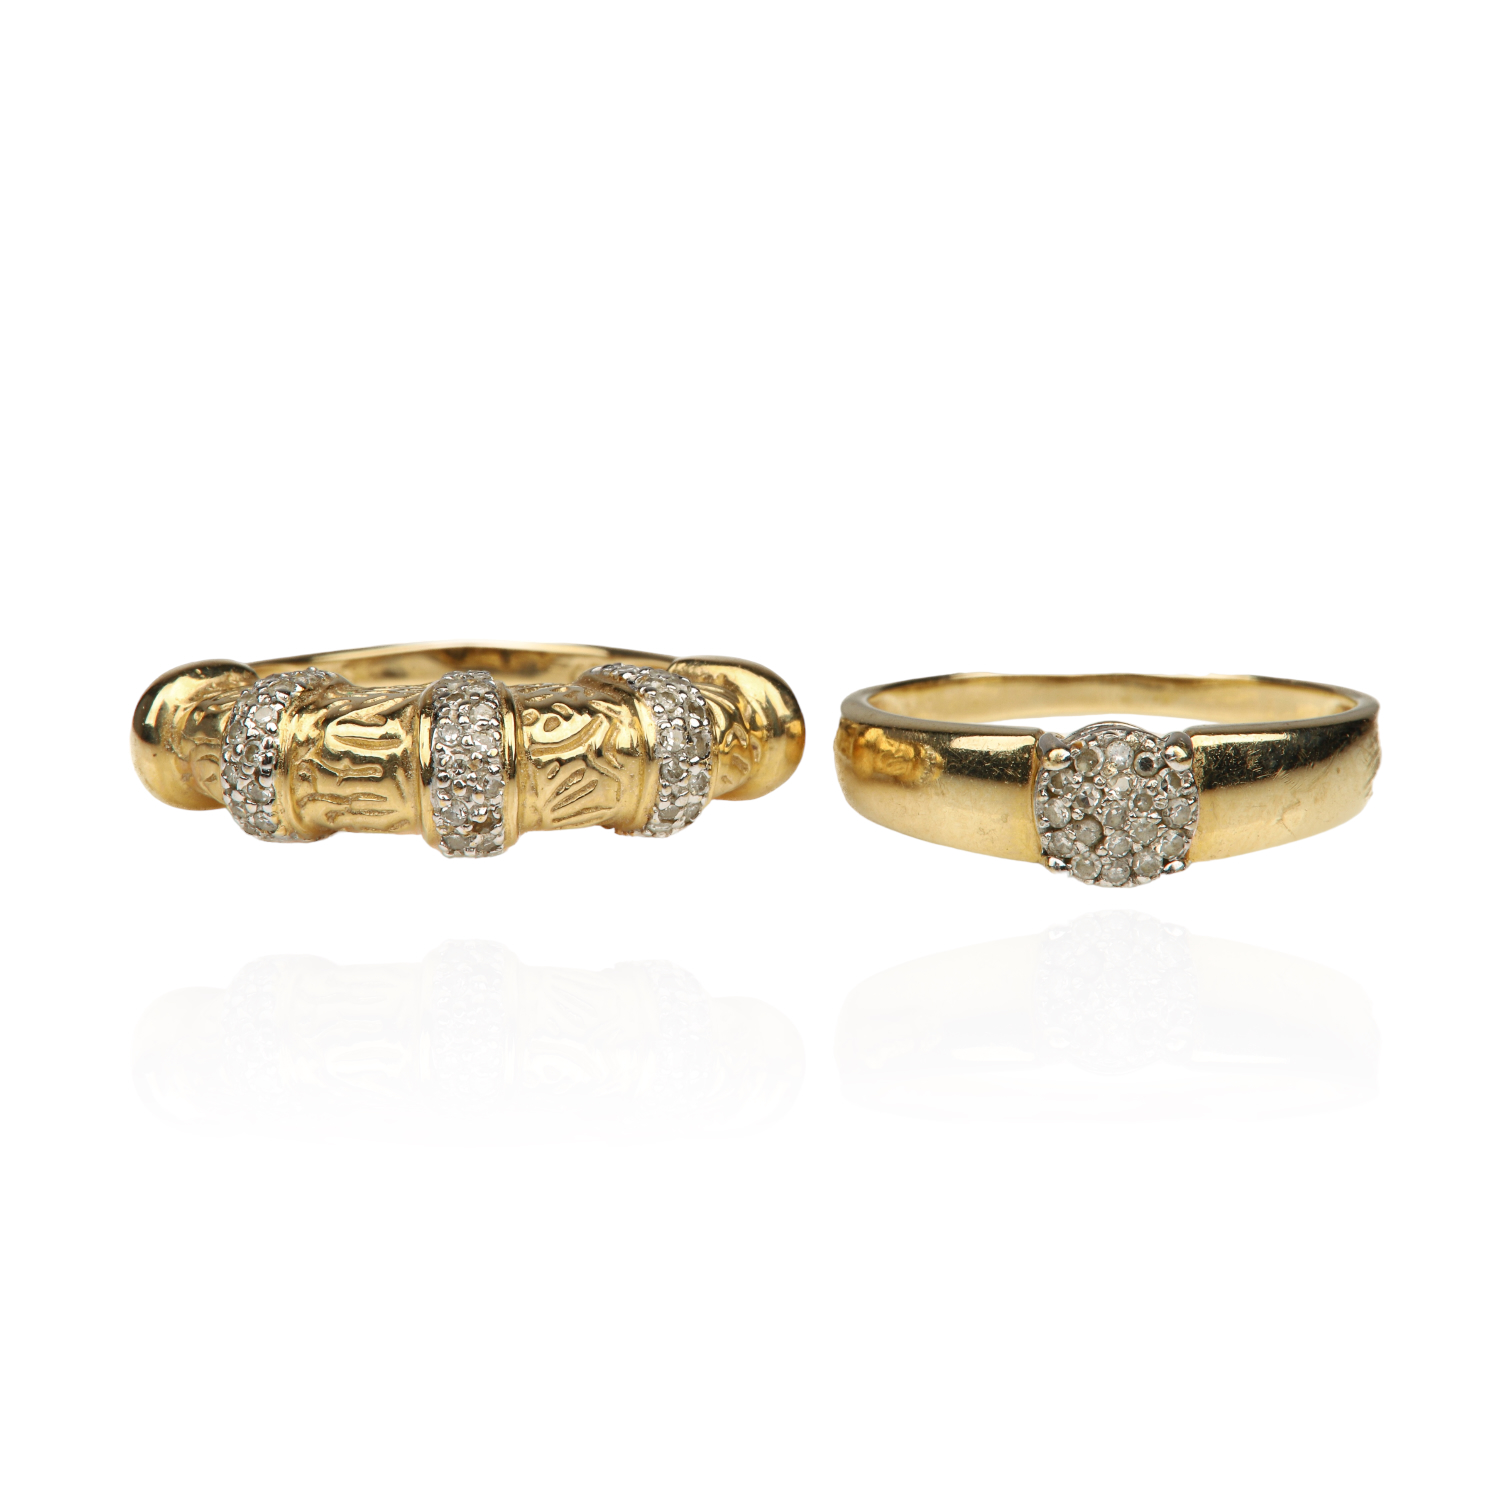  2 14K Yellow gold rings a textured 3b3a02